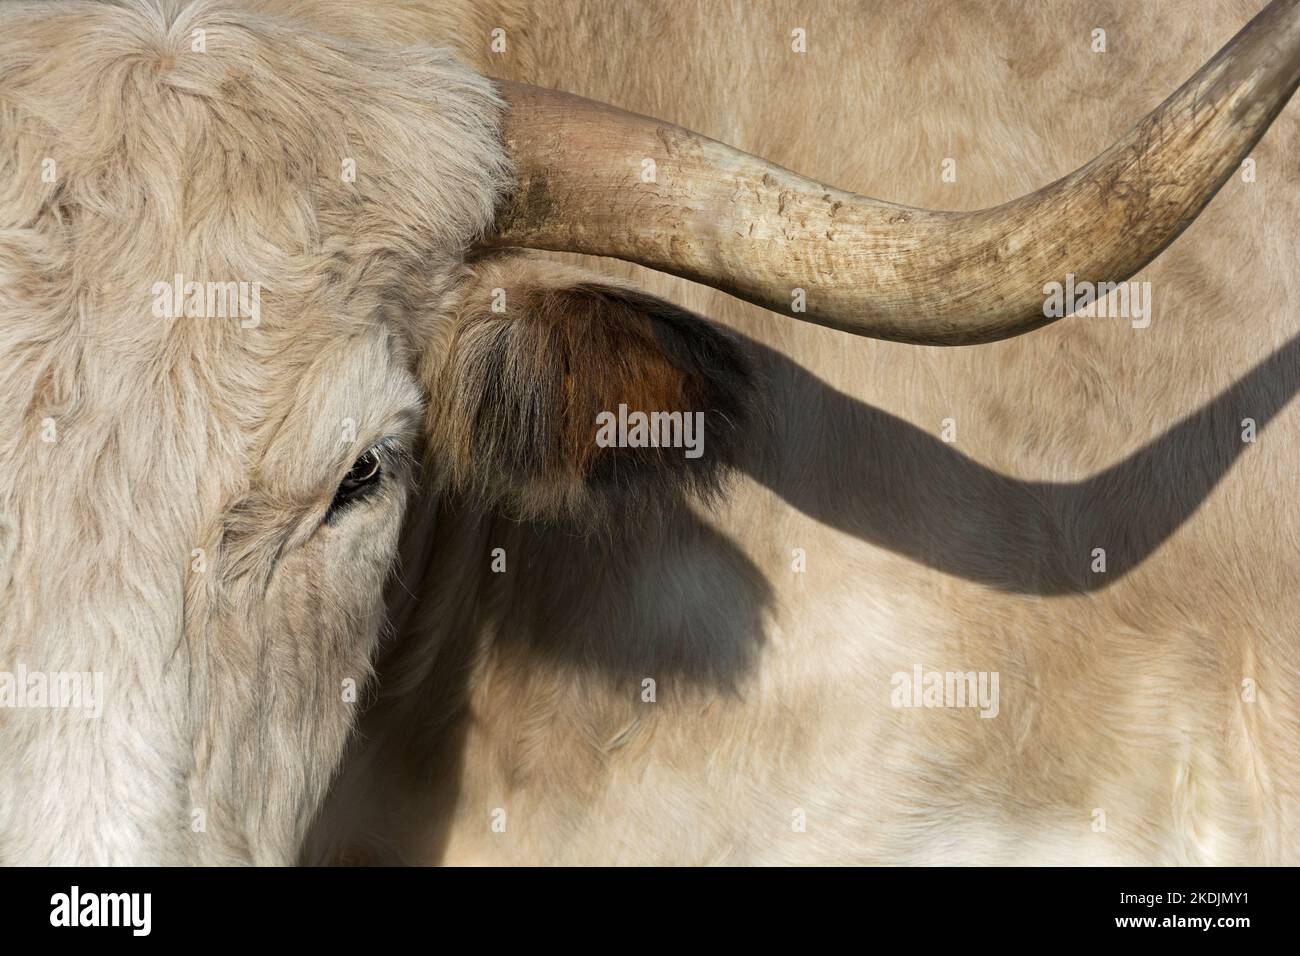 Close-up of a Bull (Heckrind) Stock Photo